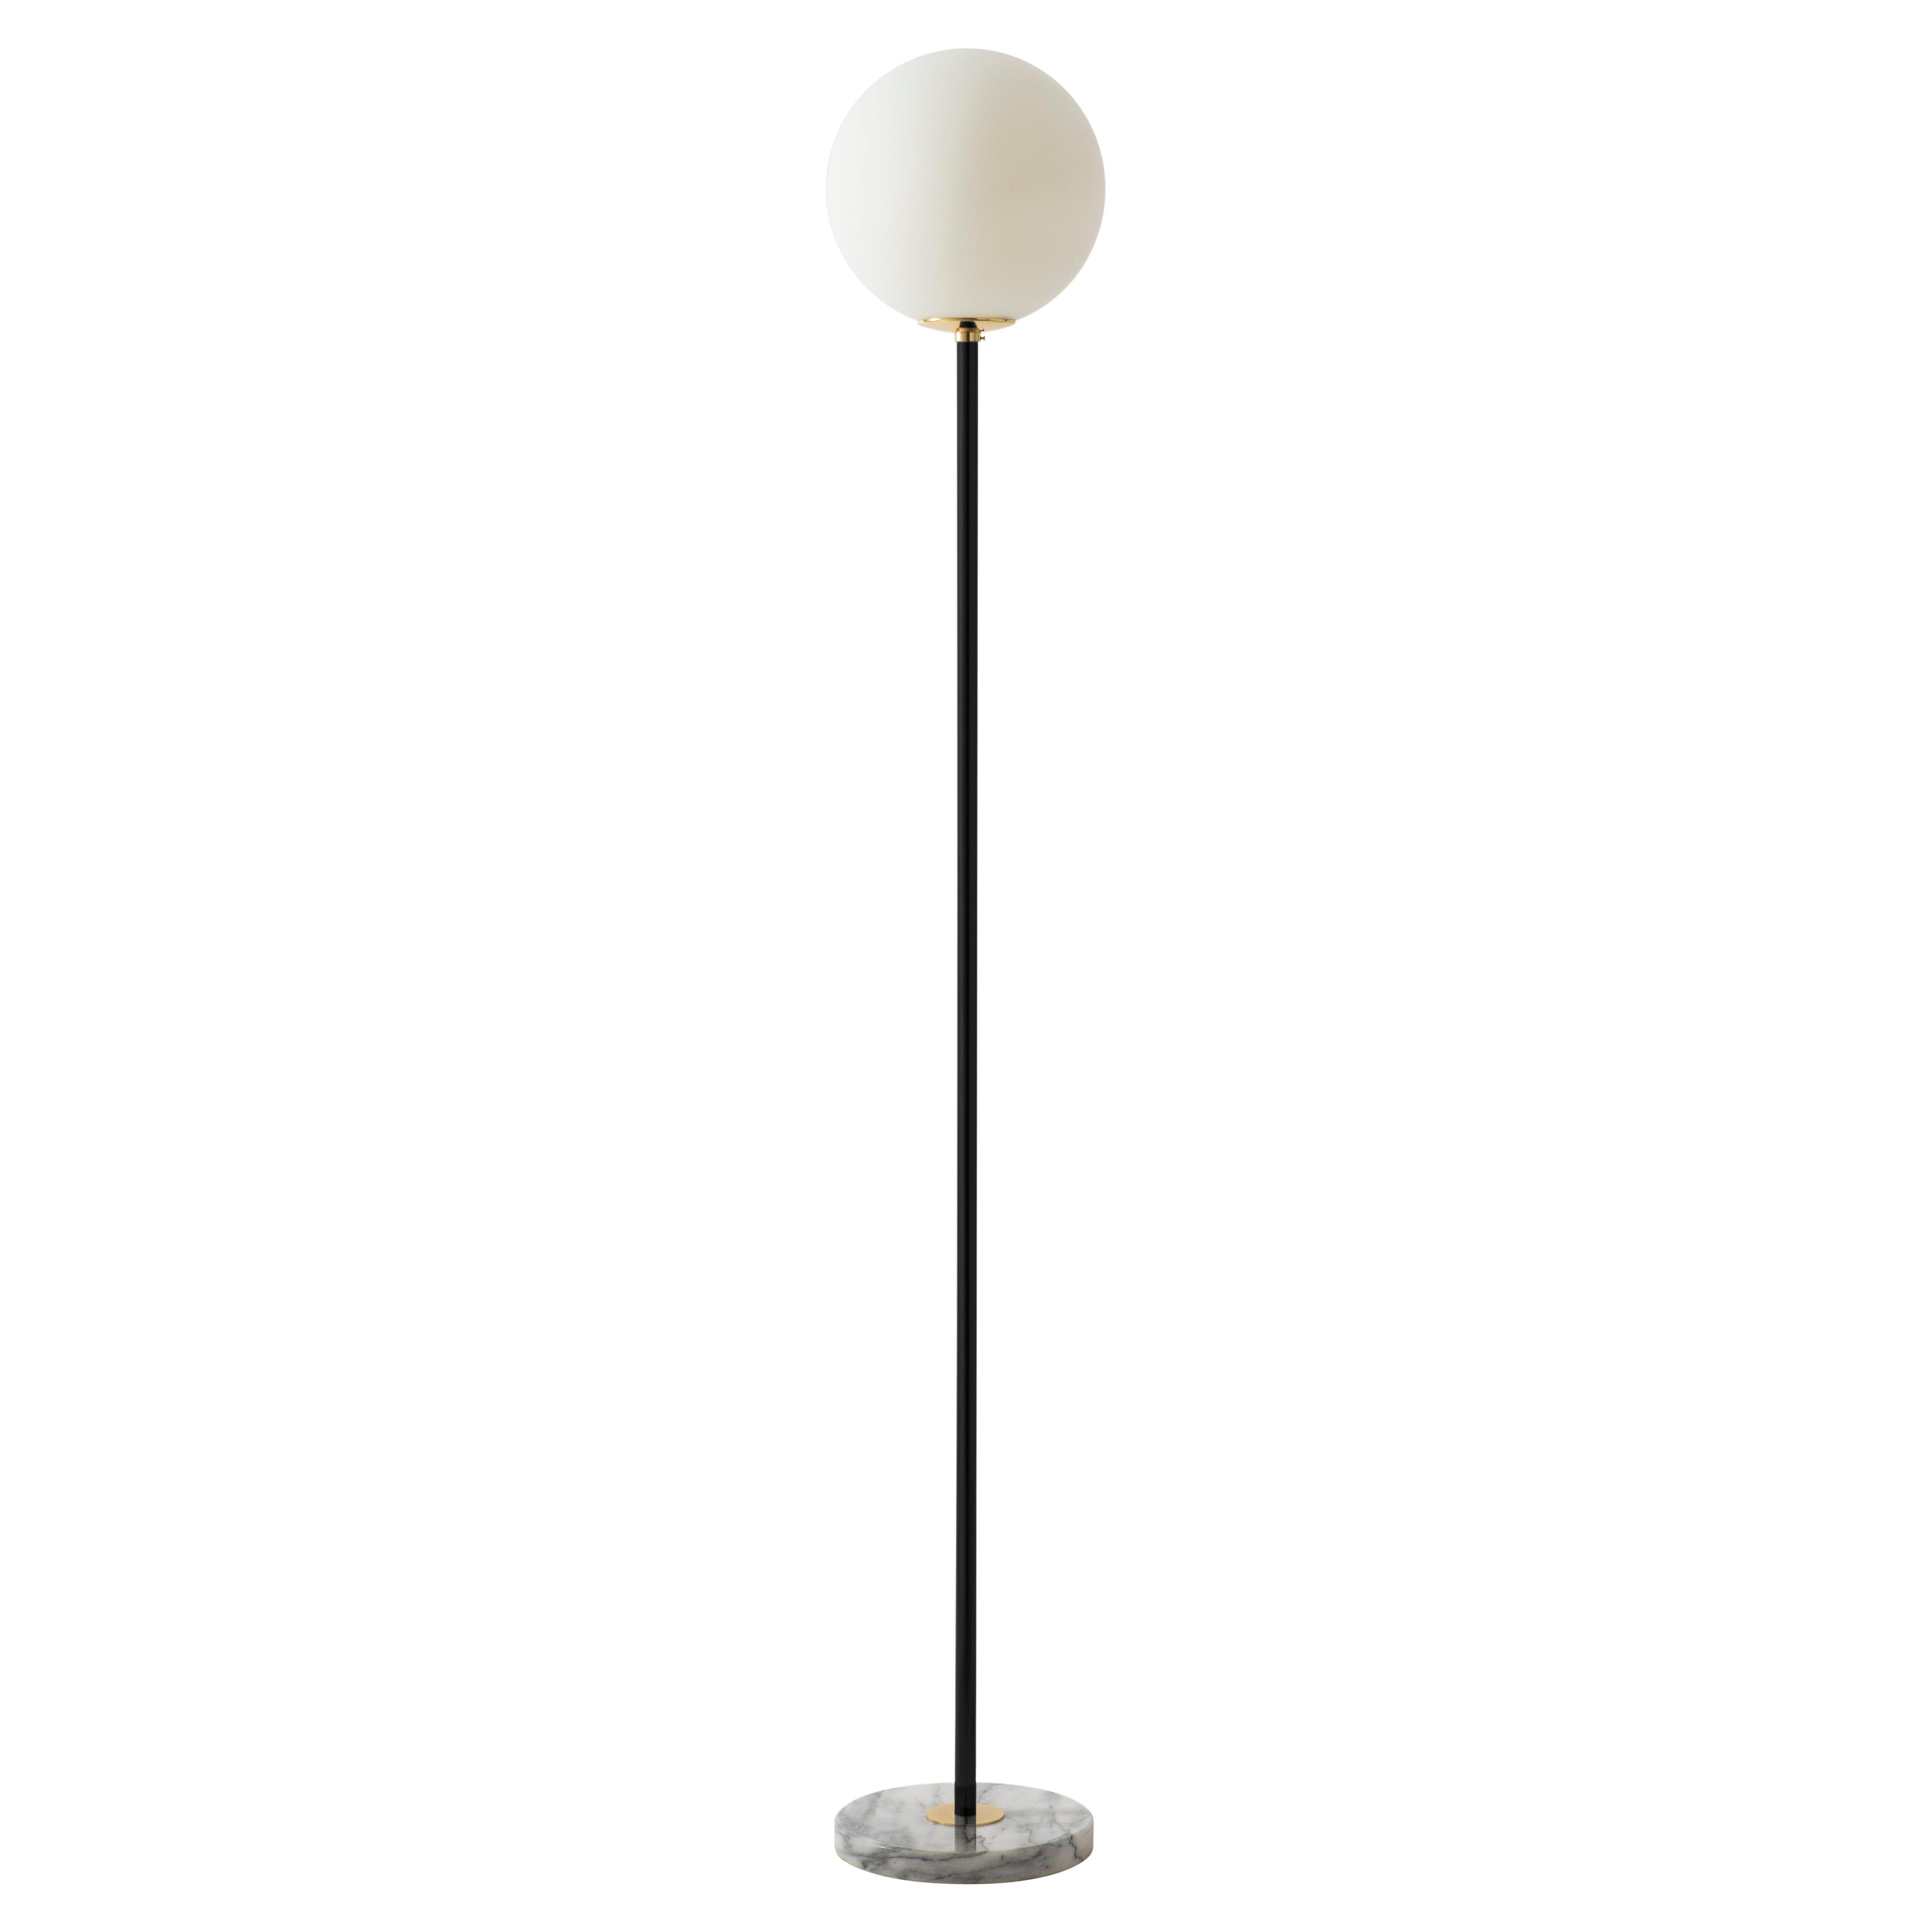 06 Floor lamp 160 by Magic Circus Editions
Dimensions: D 25 x H 160 cm
Materials: Carrara marble base, smooth brass tube, glossy mouth blown glass
Dimmable version available.


Rethinking, reimagining, redesigning familiar objects that we look